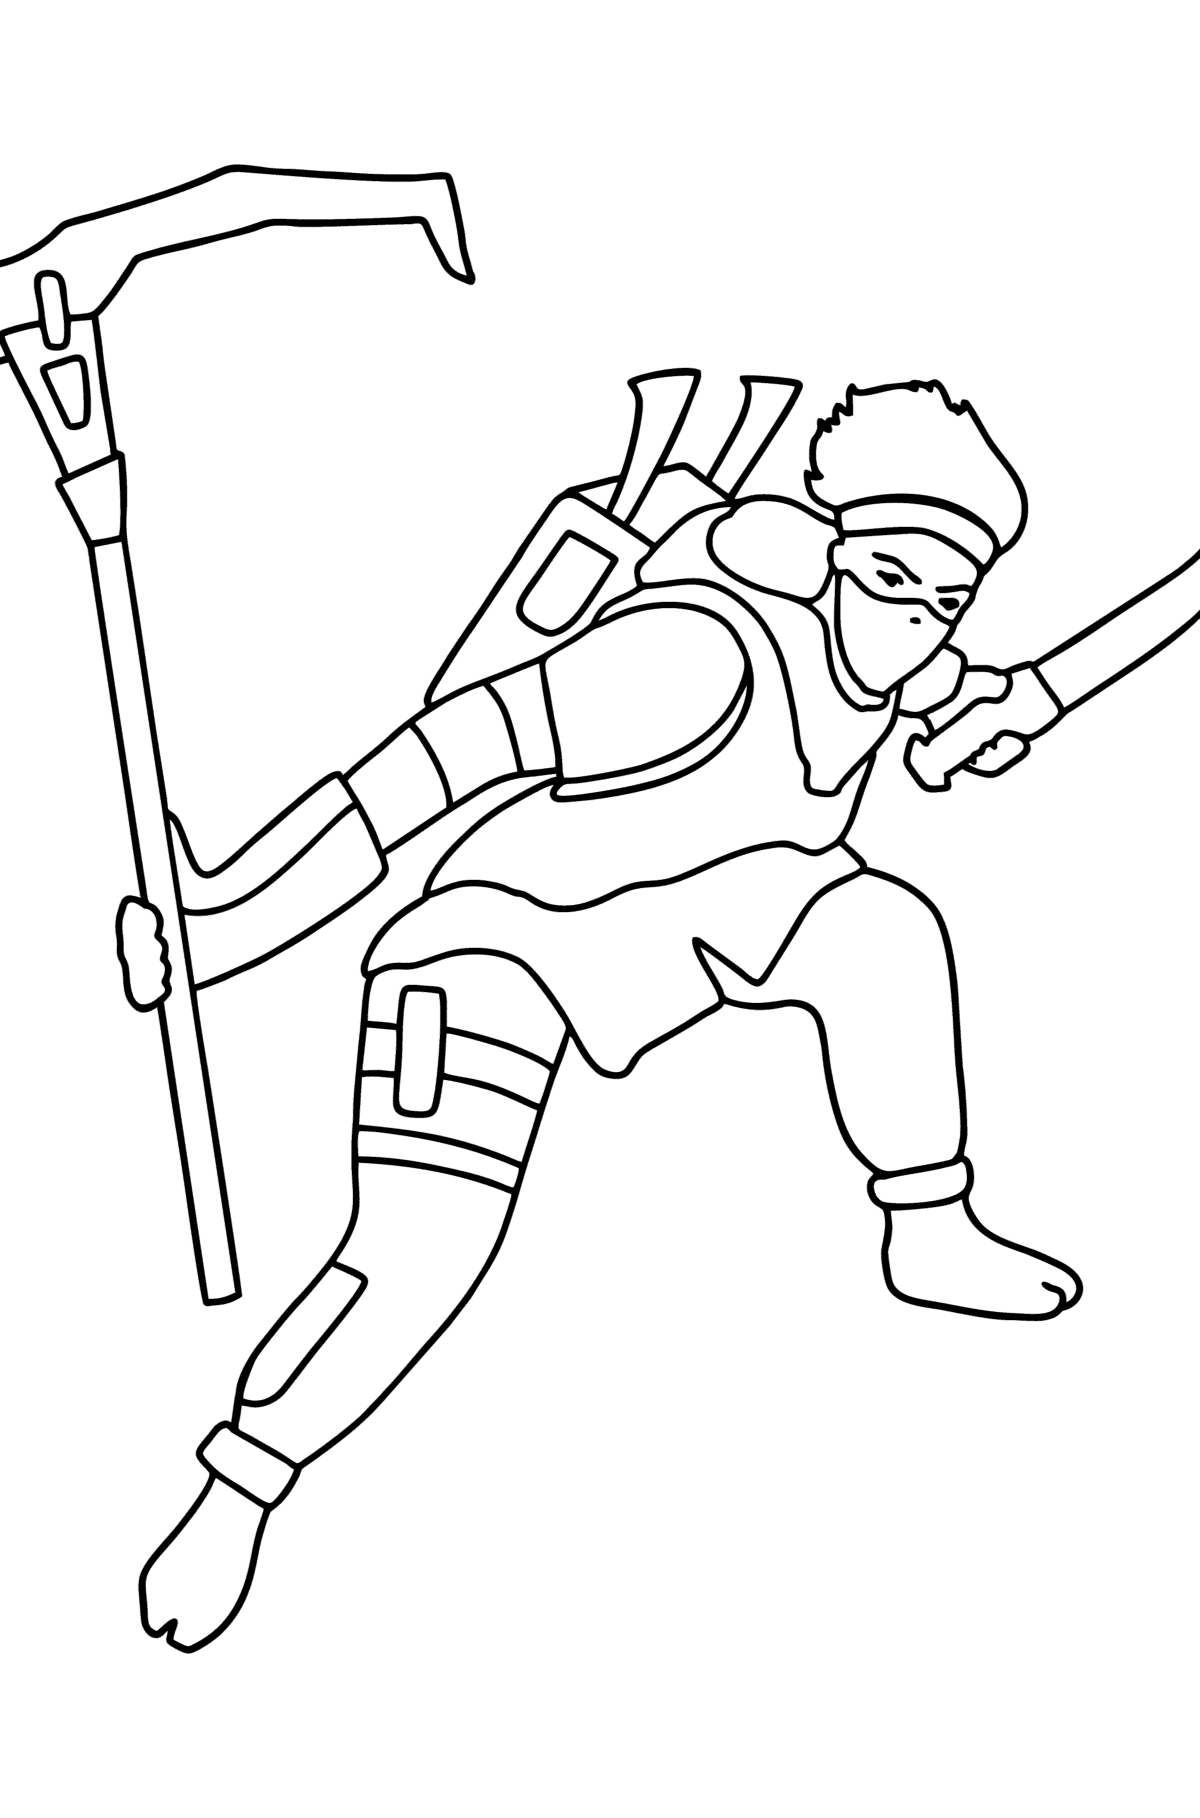 Fortnite Ninja coloring page - Coloring Pages for Kids